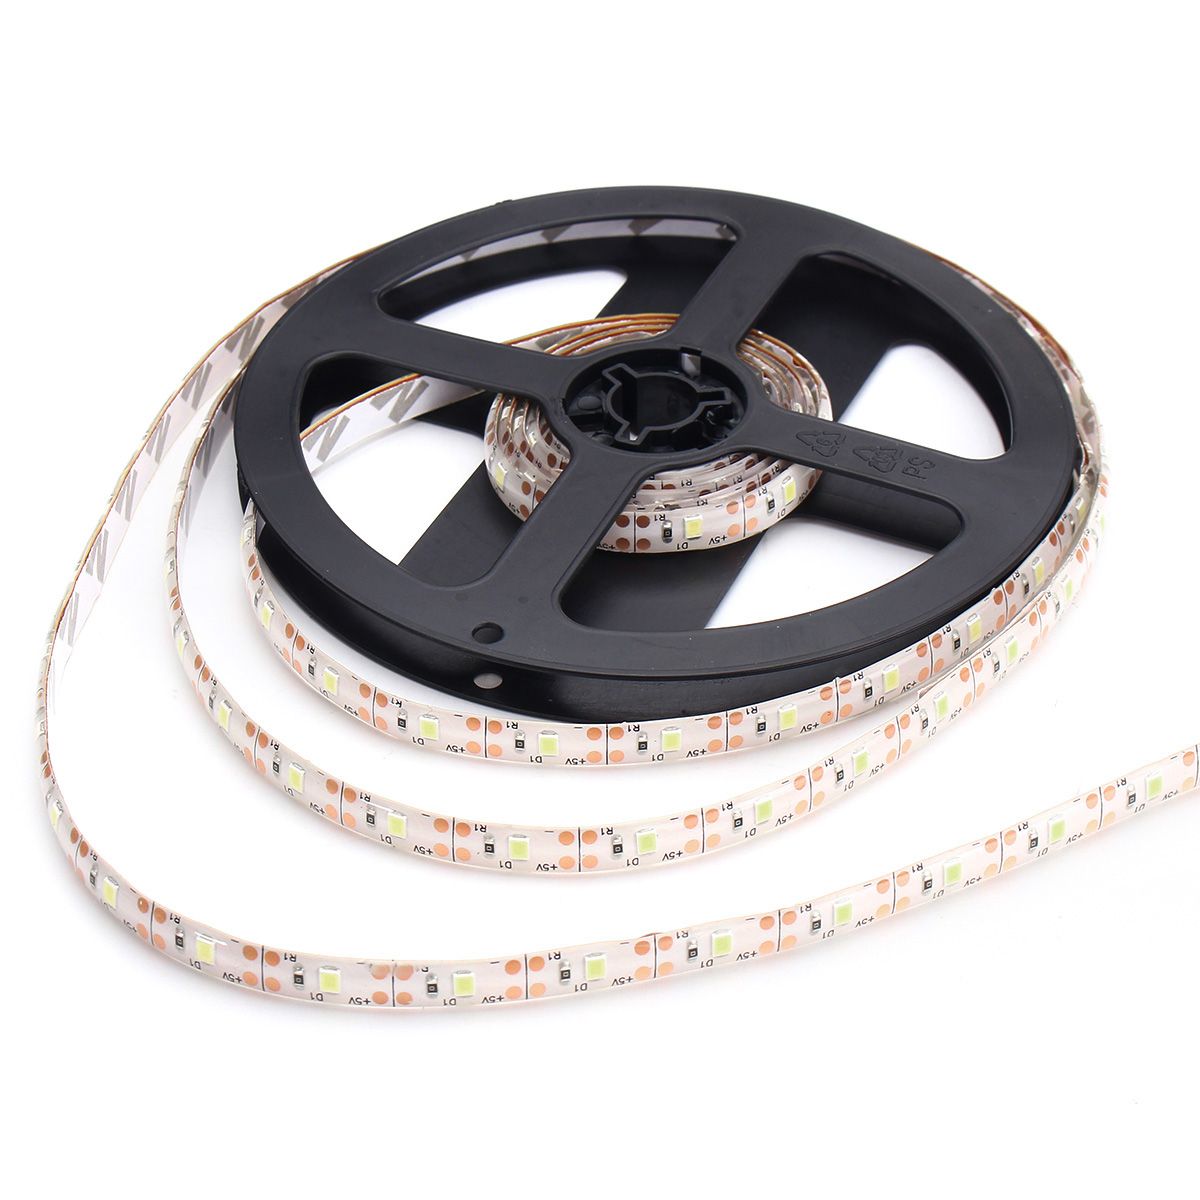 DC5V-2M-Pure-White-Warm-White-Red-Blue-2835-SMD-Waterproof-USB-LED-Strip-Backlight-for-Home-1212662